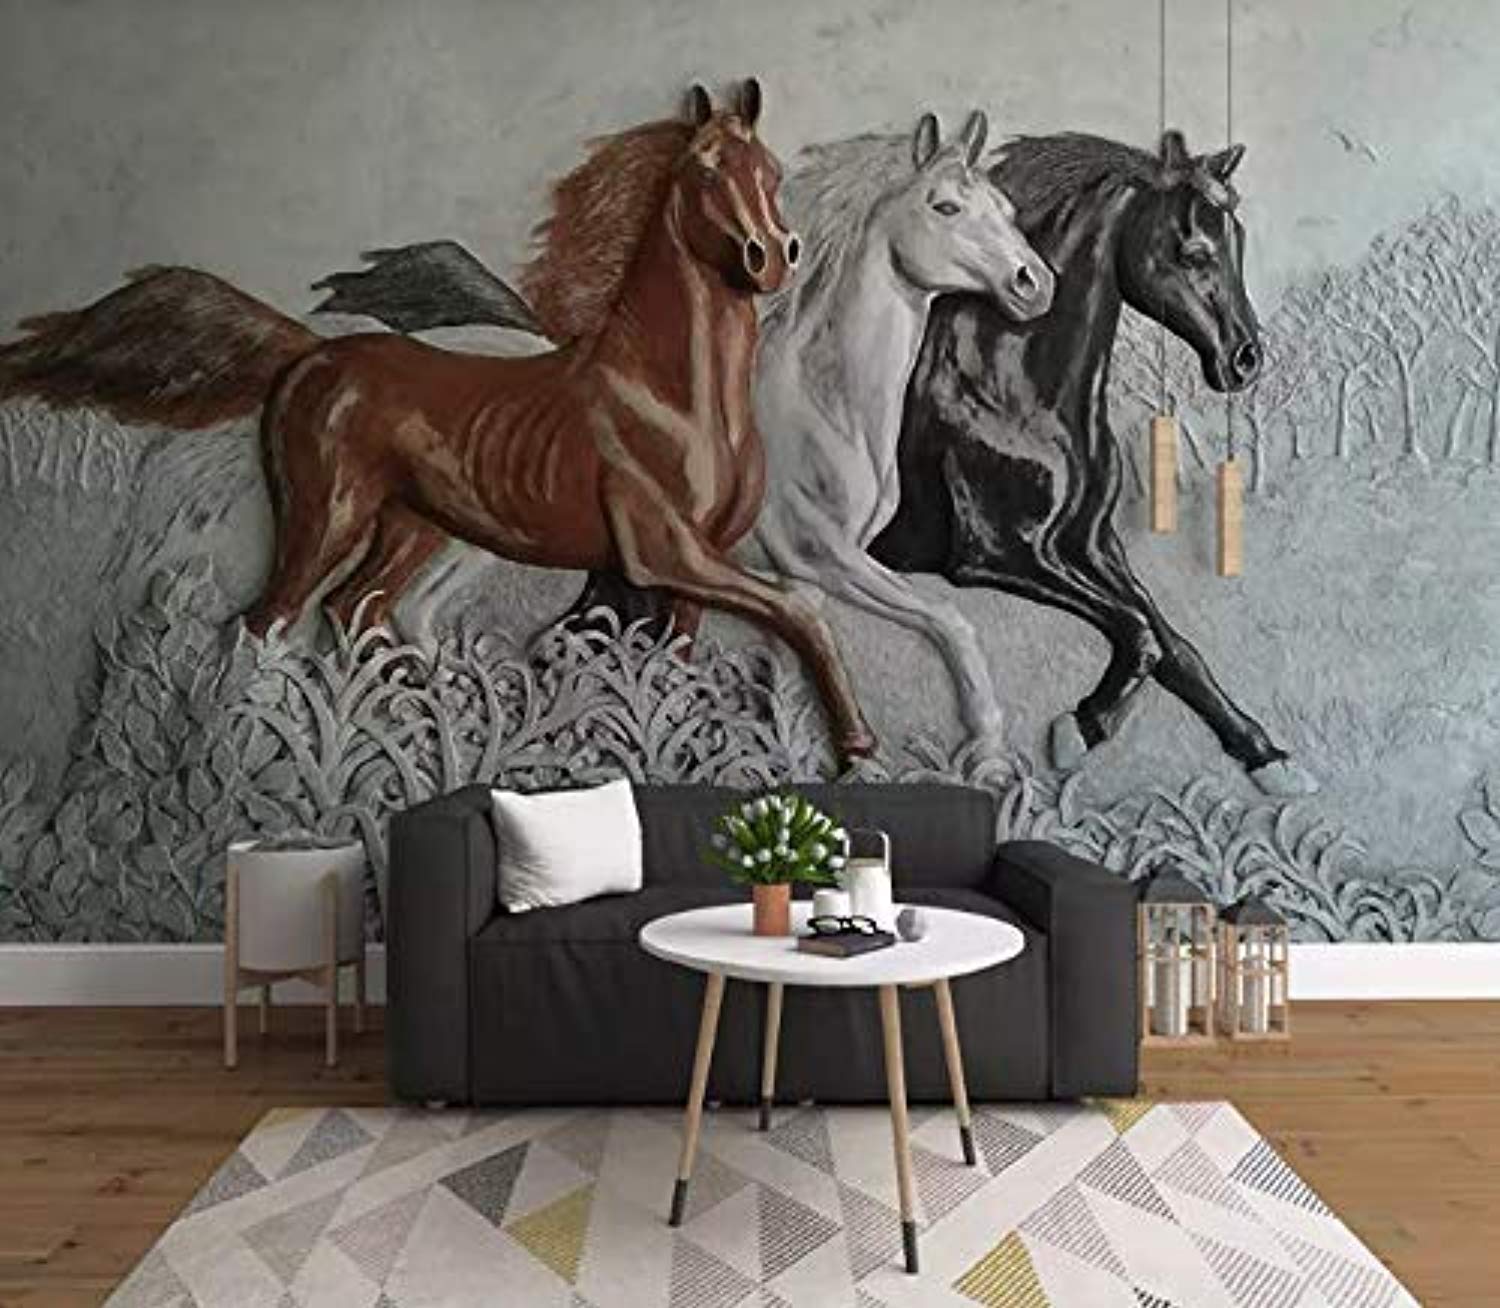 Running horses 3d wallpaper. Our wallpaper collections include many  beautiful animal prints. This design is cus… | Custom photo wallpaper,  Animal mural, Horse mural